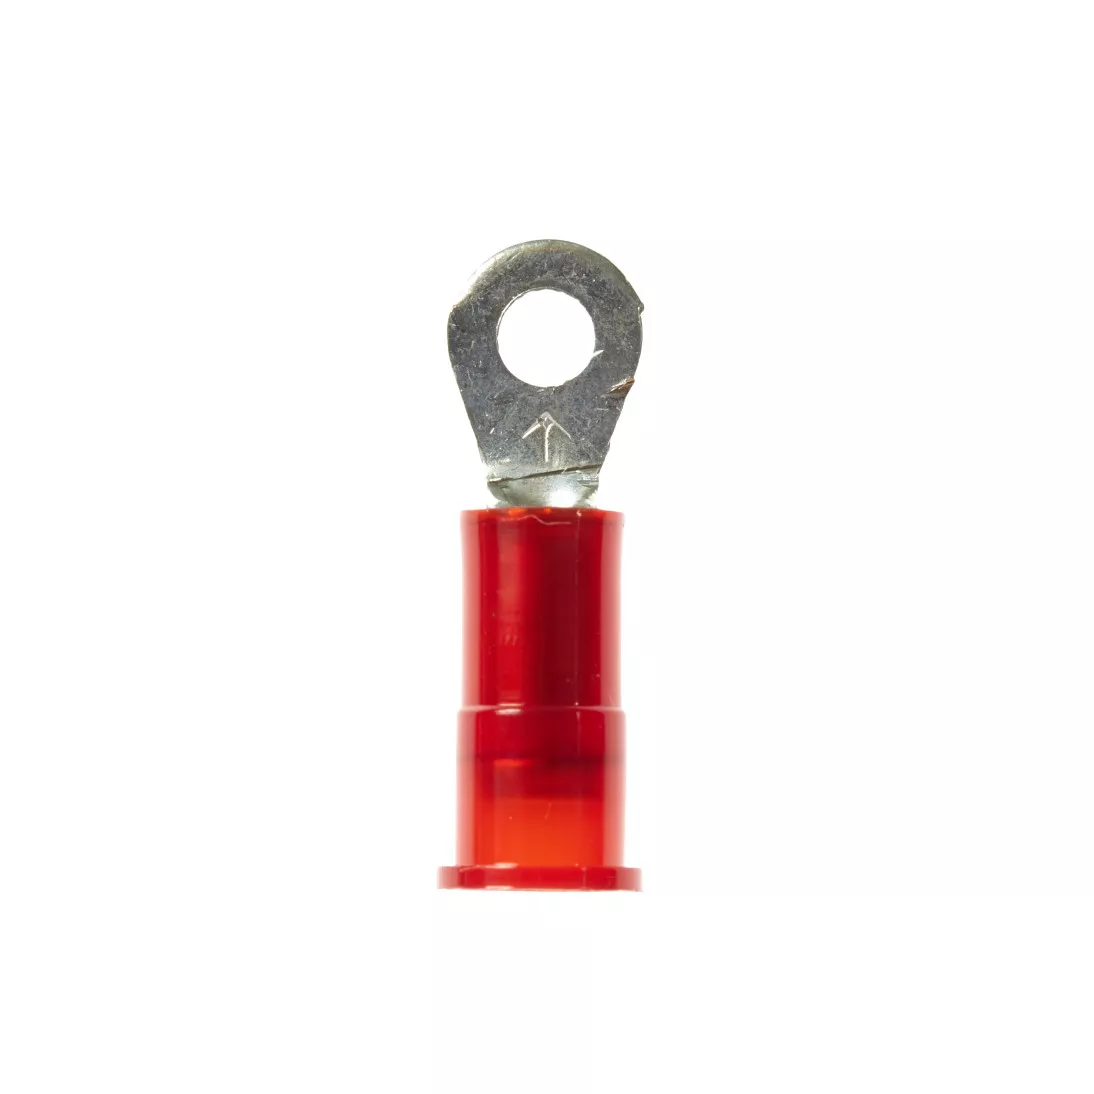 3M™ Scotchlok™ Ring Tongue, Nylon Insulated w/Insulation Grip
MNG18-4R/SK, Stud Size 4, 1000/Case